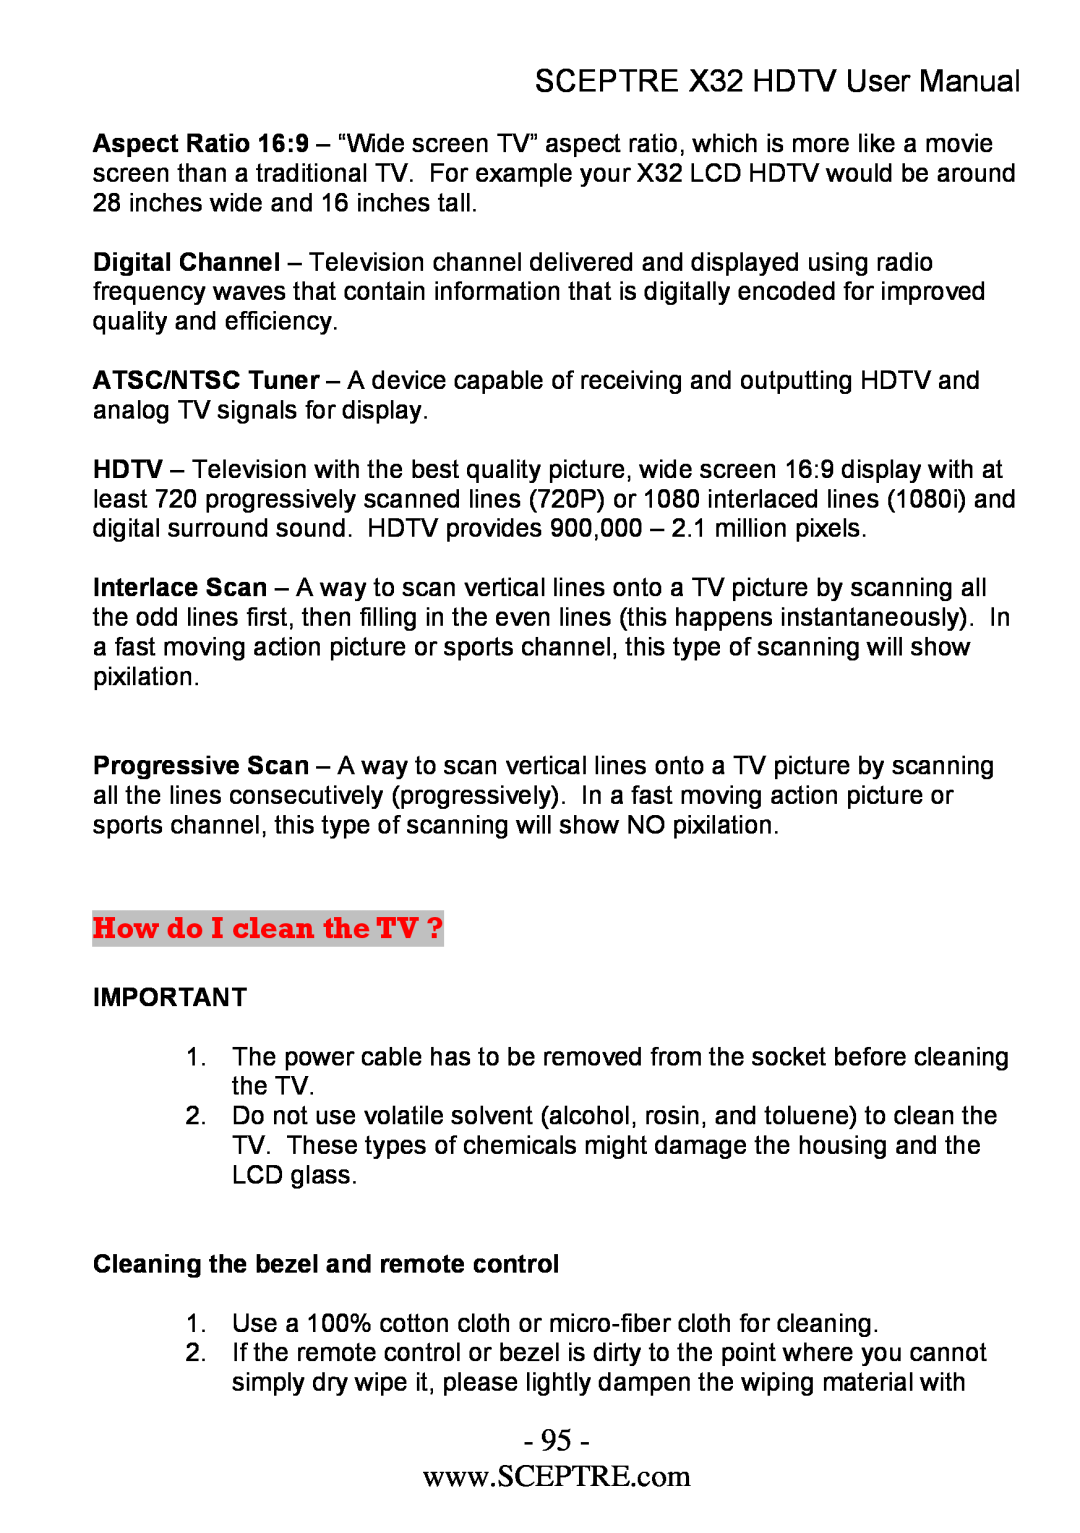 Sceptre Technologies x32 How do I clean the TV ?, SCEPTRE X32 HDTV User Manual, Cleaning the bezel and remote control 